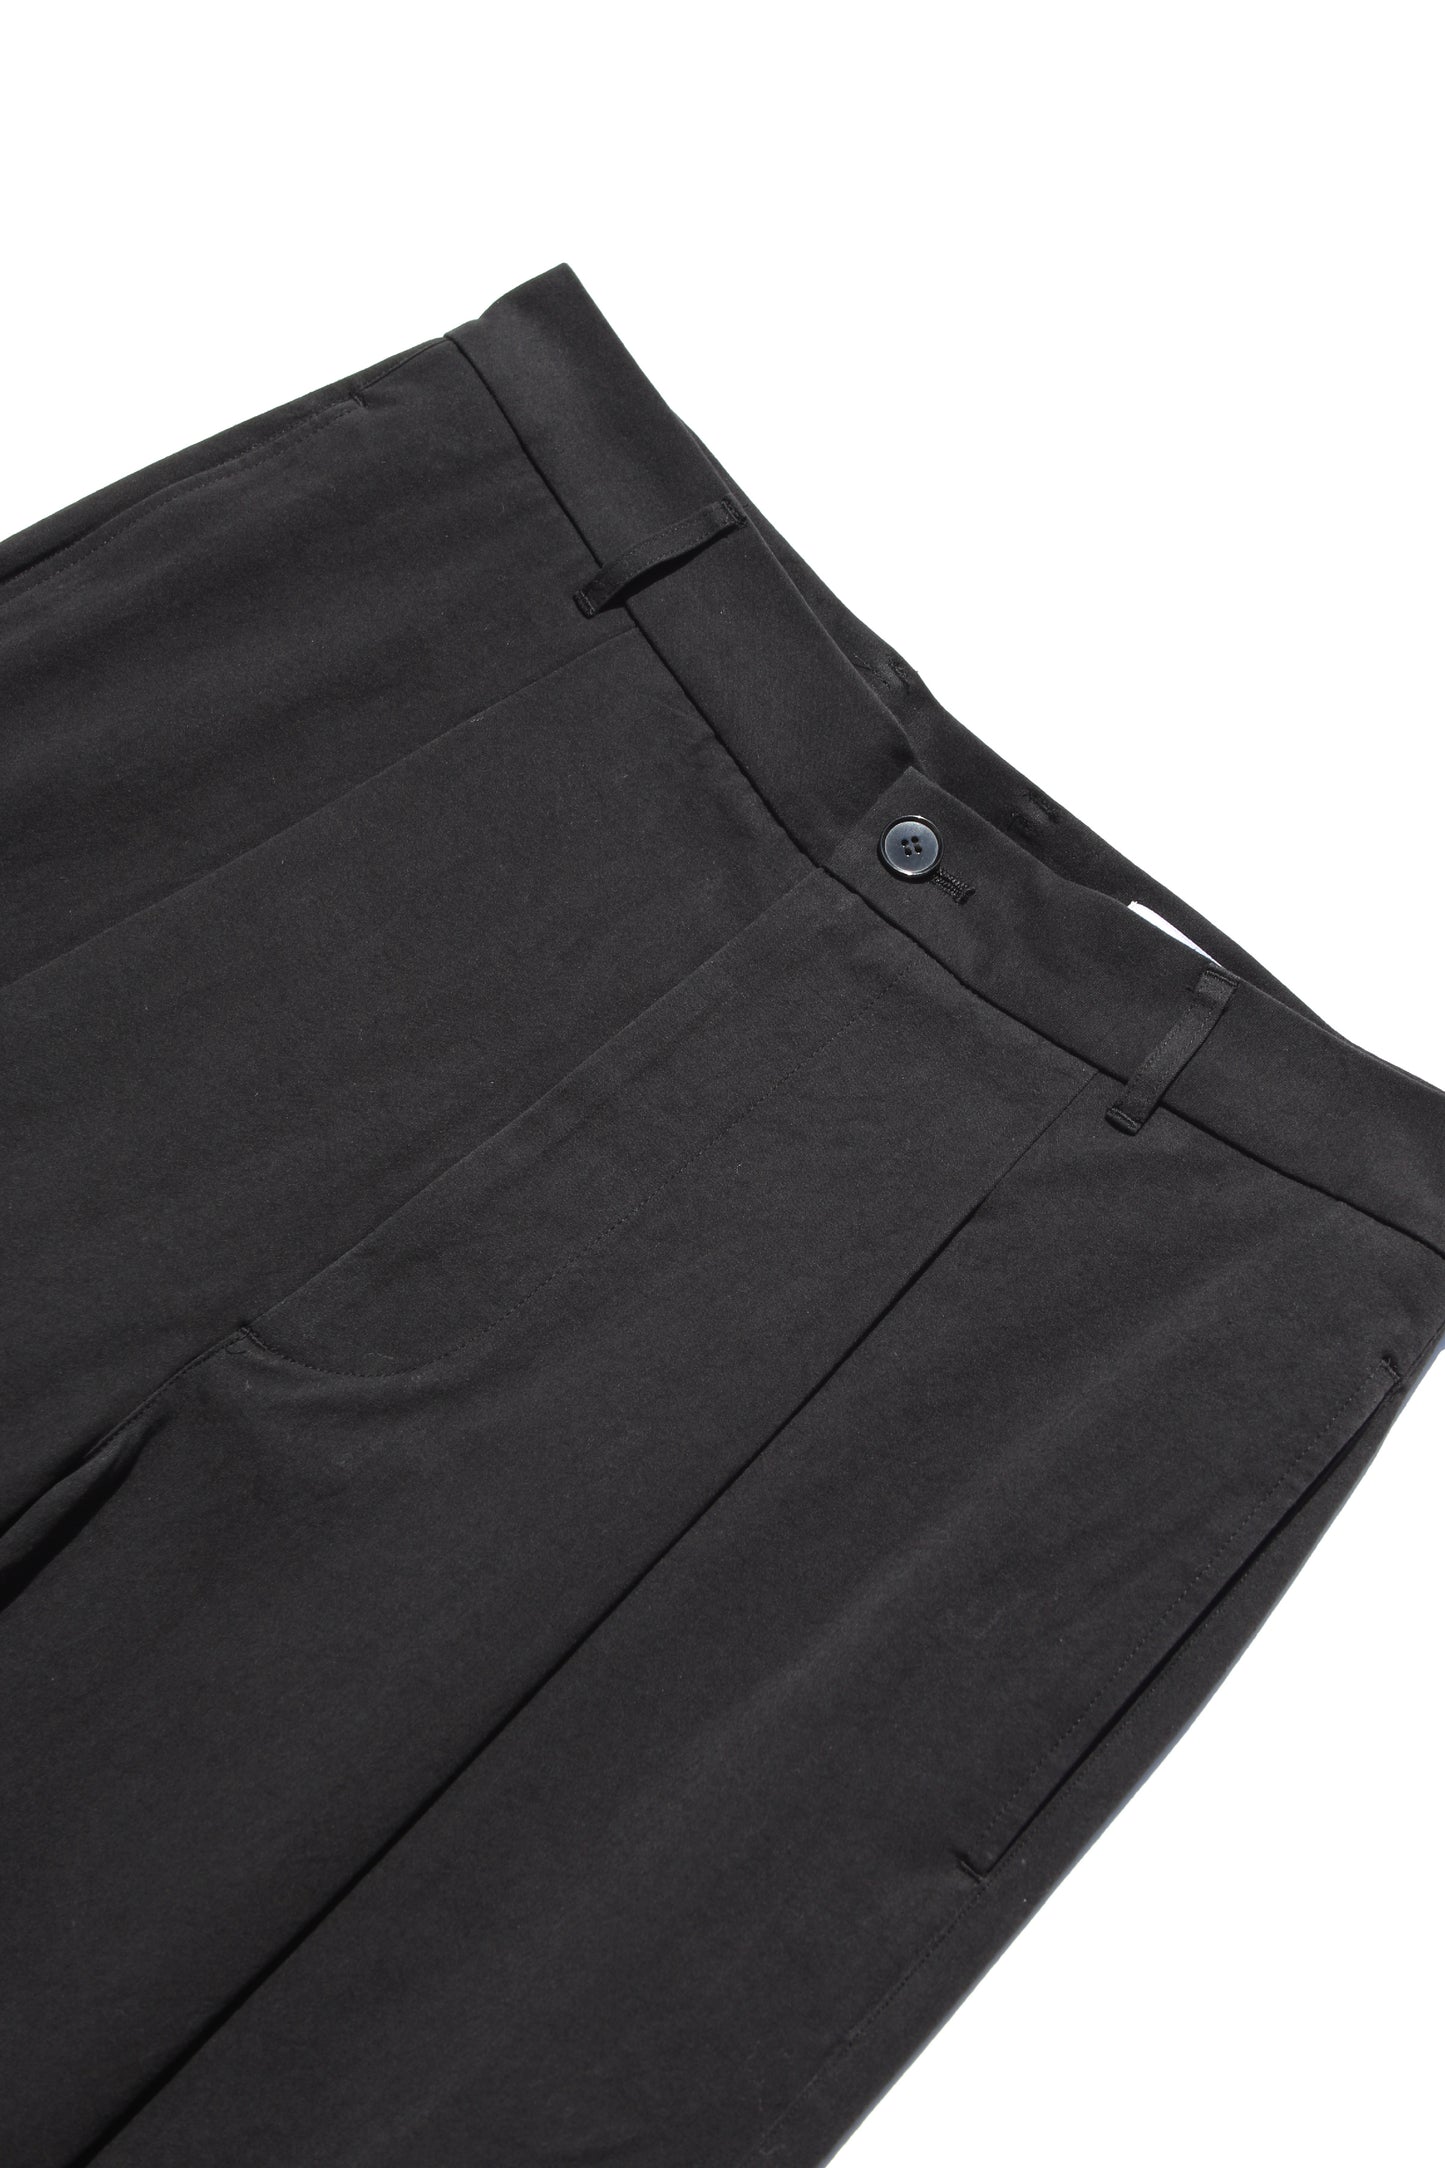 VOAAOV COTTON DYED WASHER HALF PANTS - BLACK